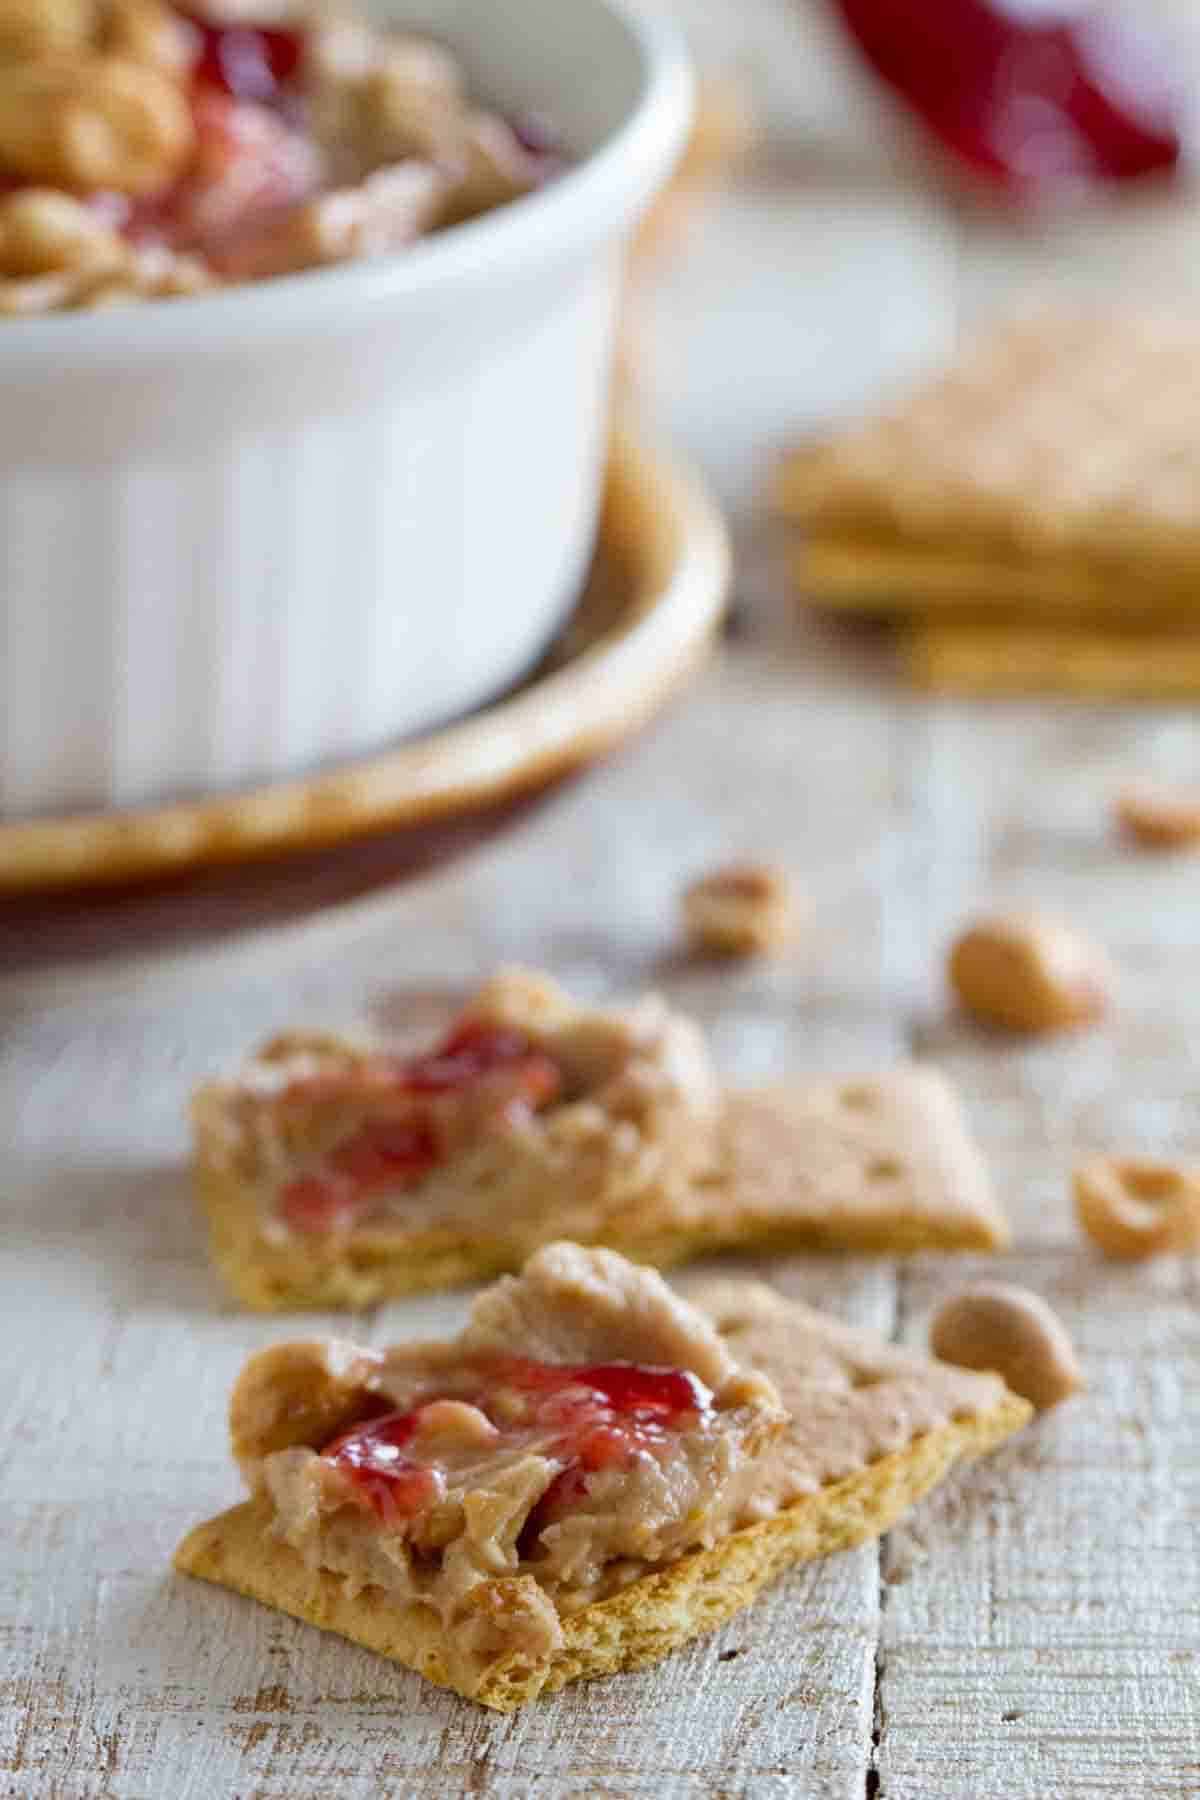 Graham cracker pieces topped with peanut butter and jelly dip.